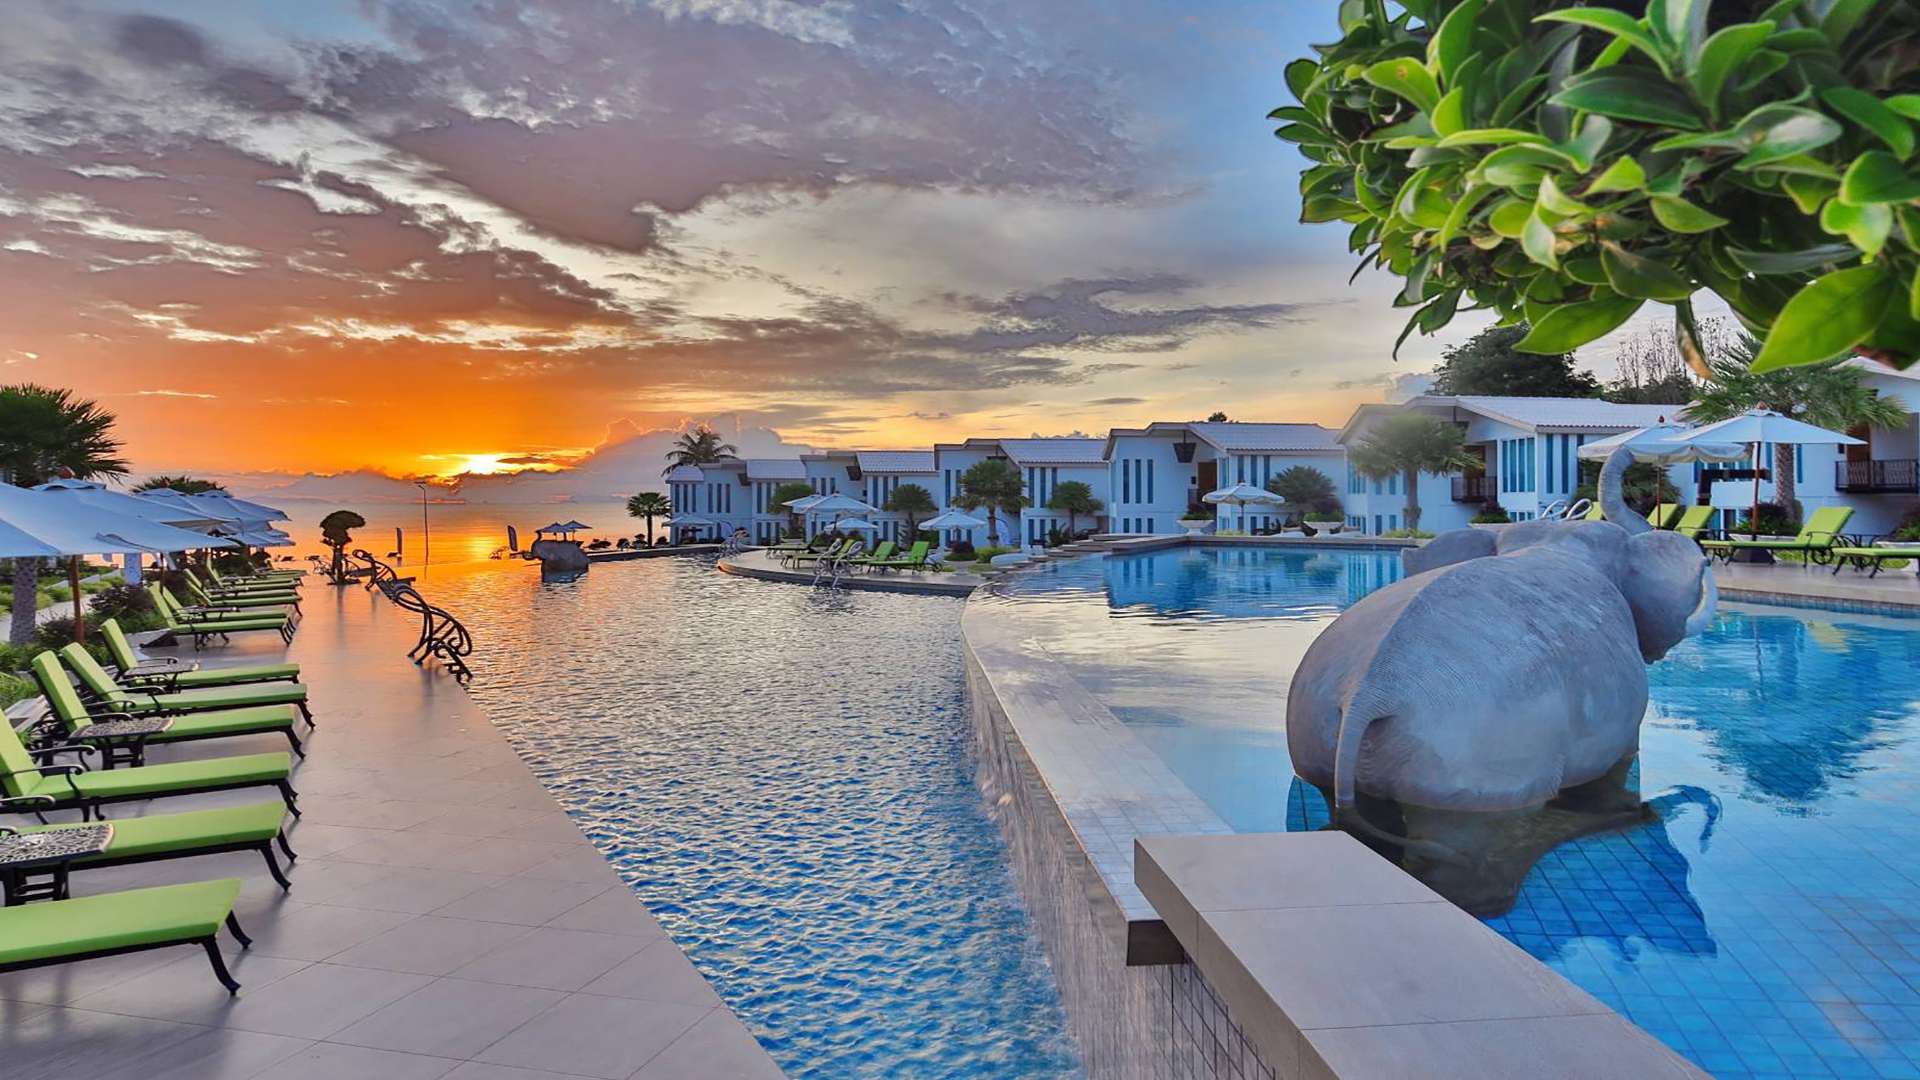 Sunsets and Spa Indulging in Luxury